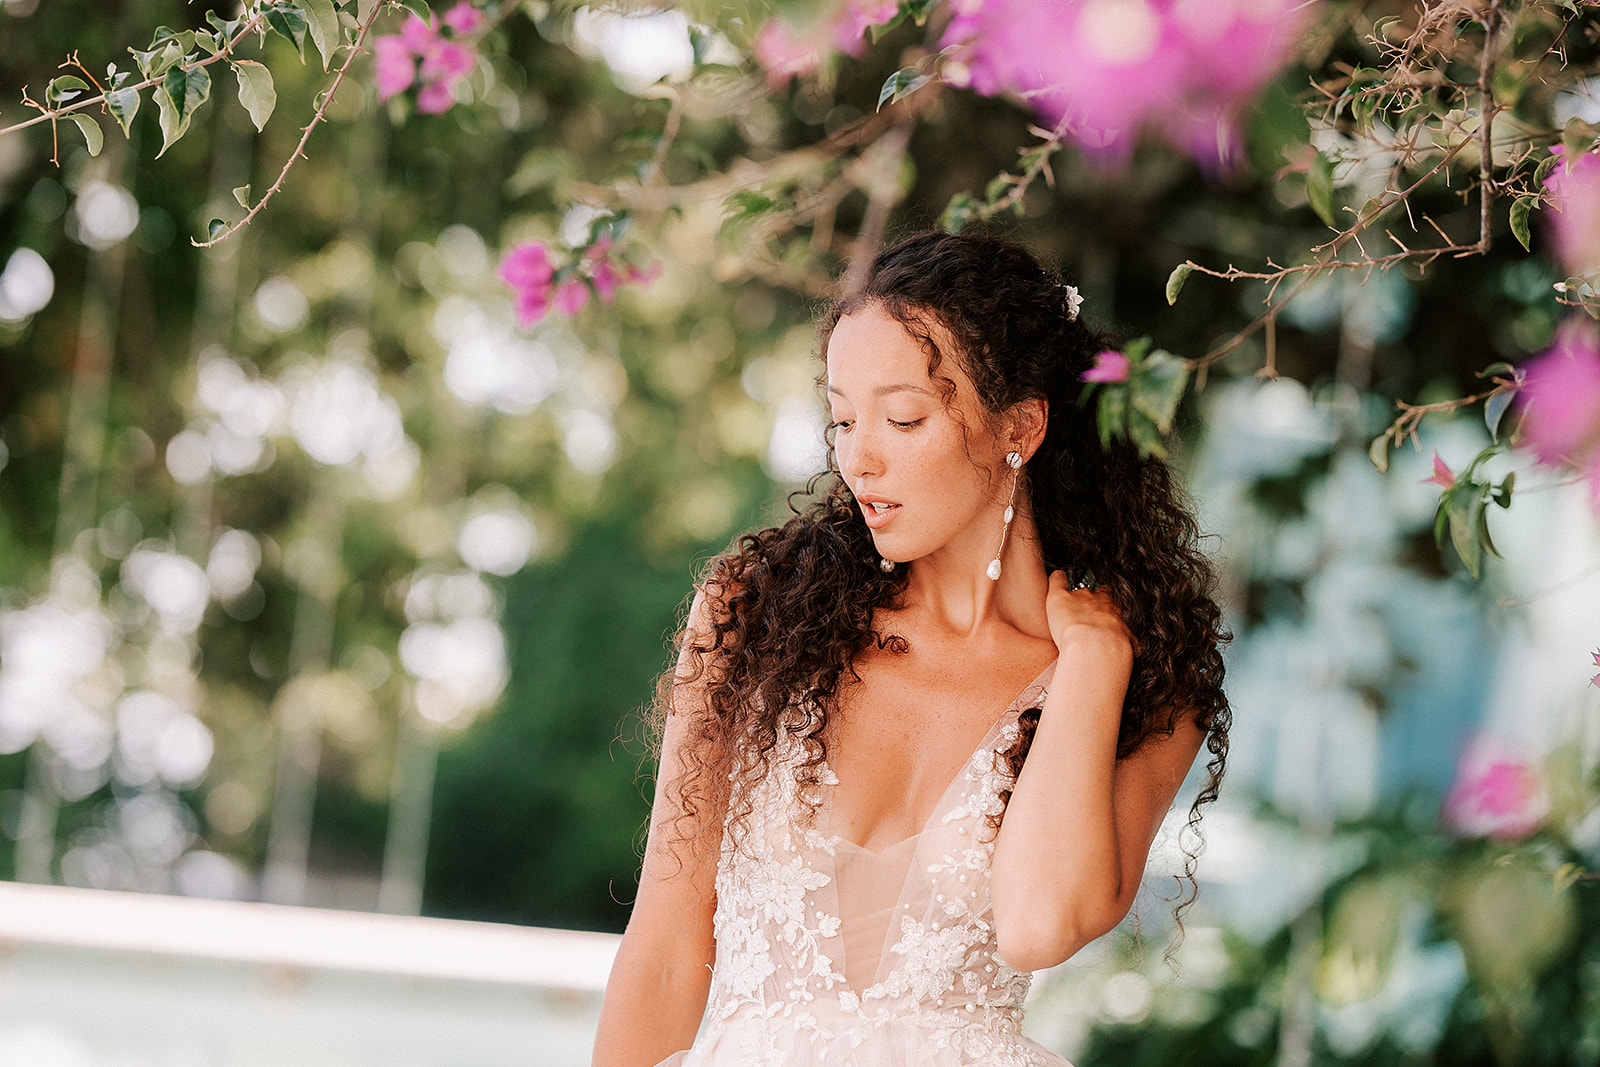 bride touching long curly hair, standing under a tree with pink flowers